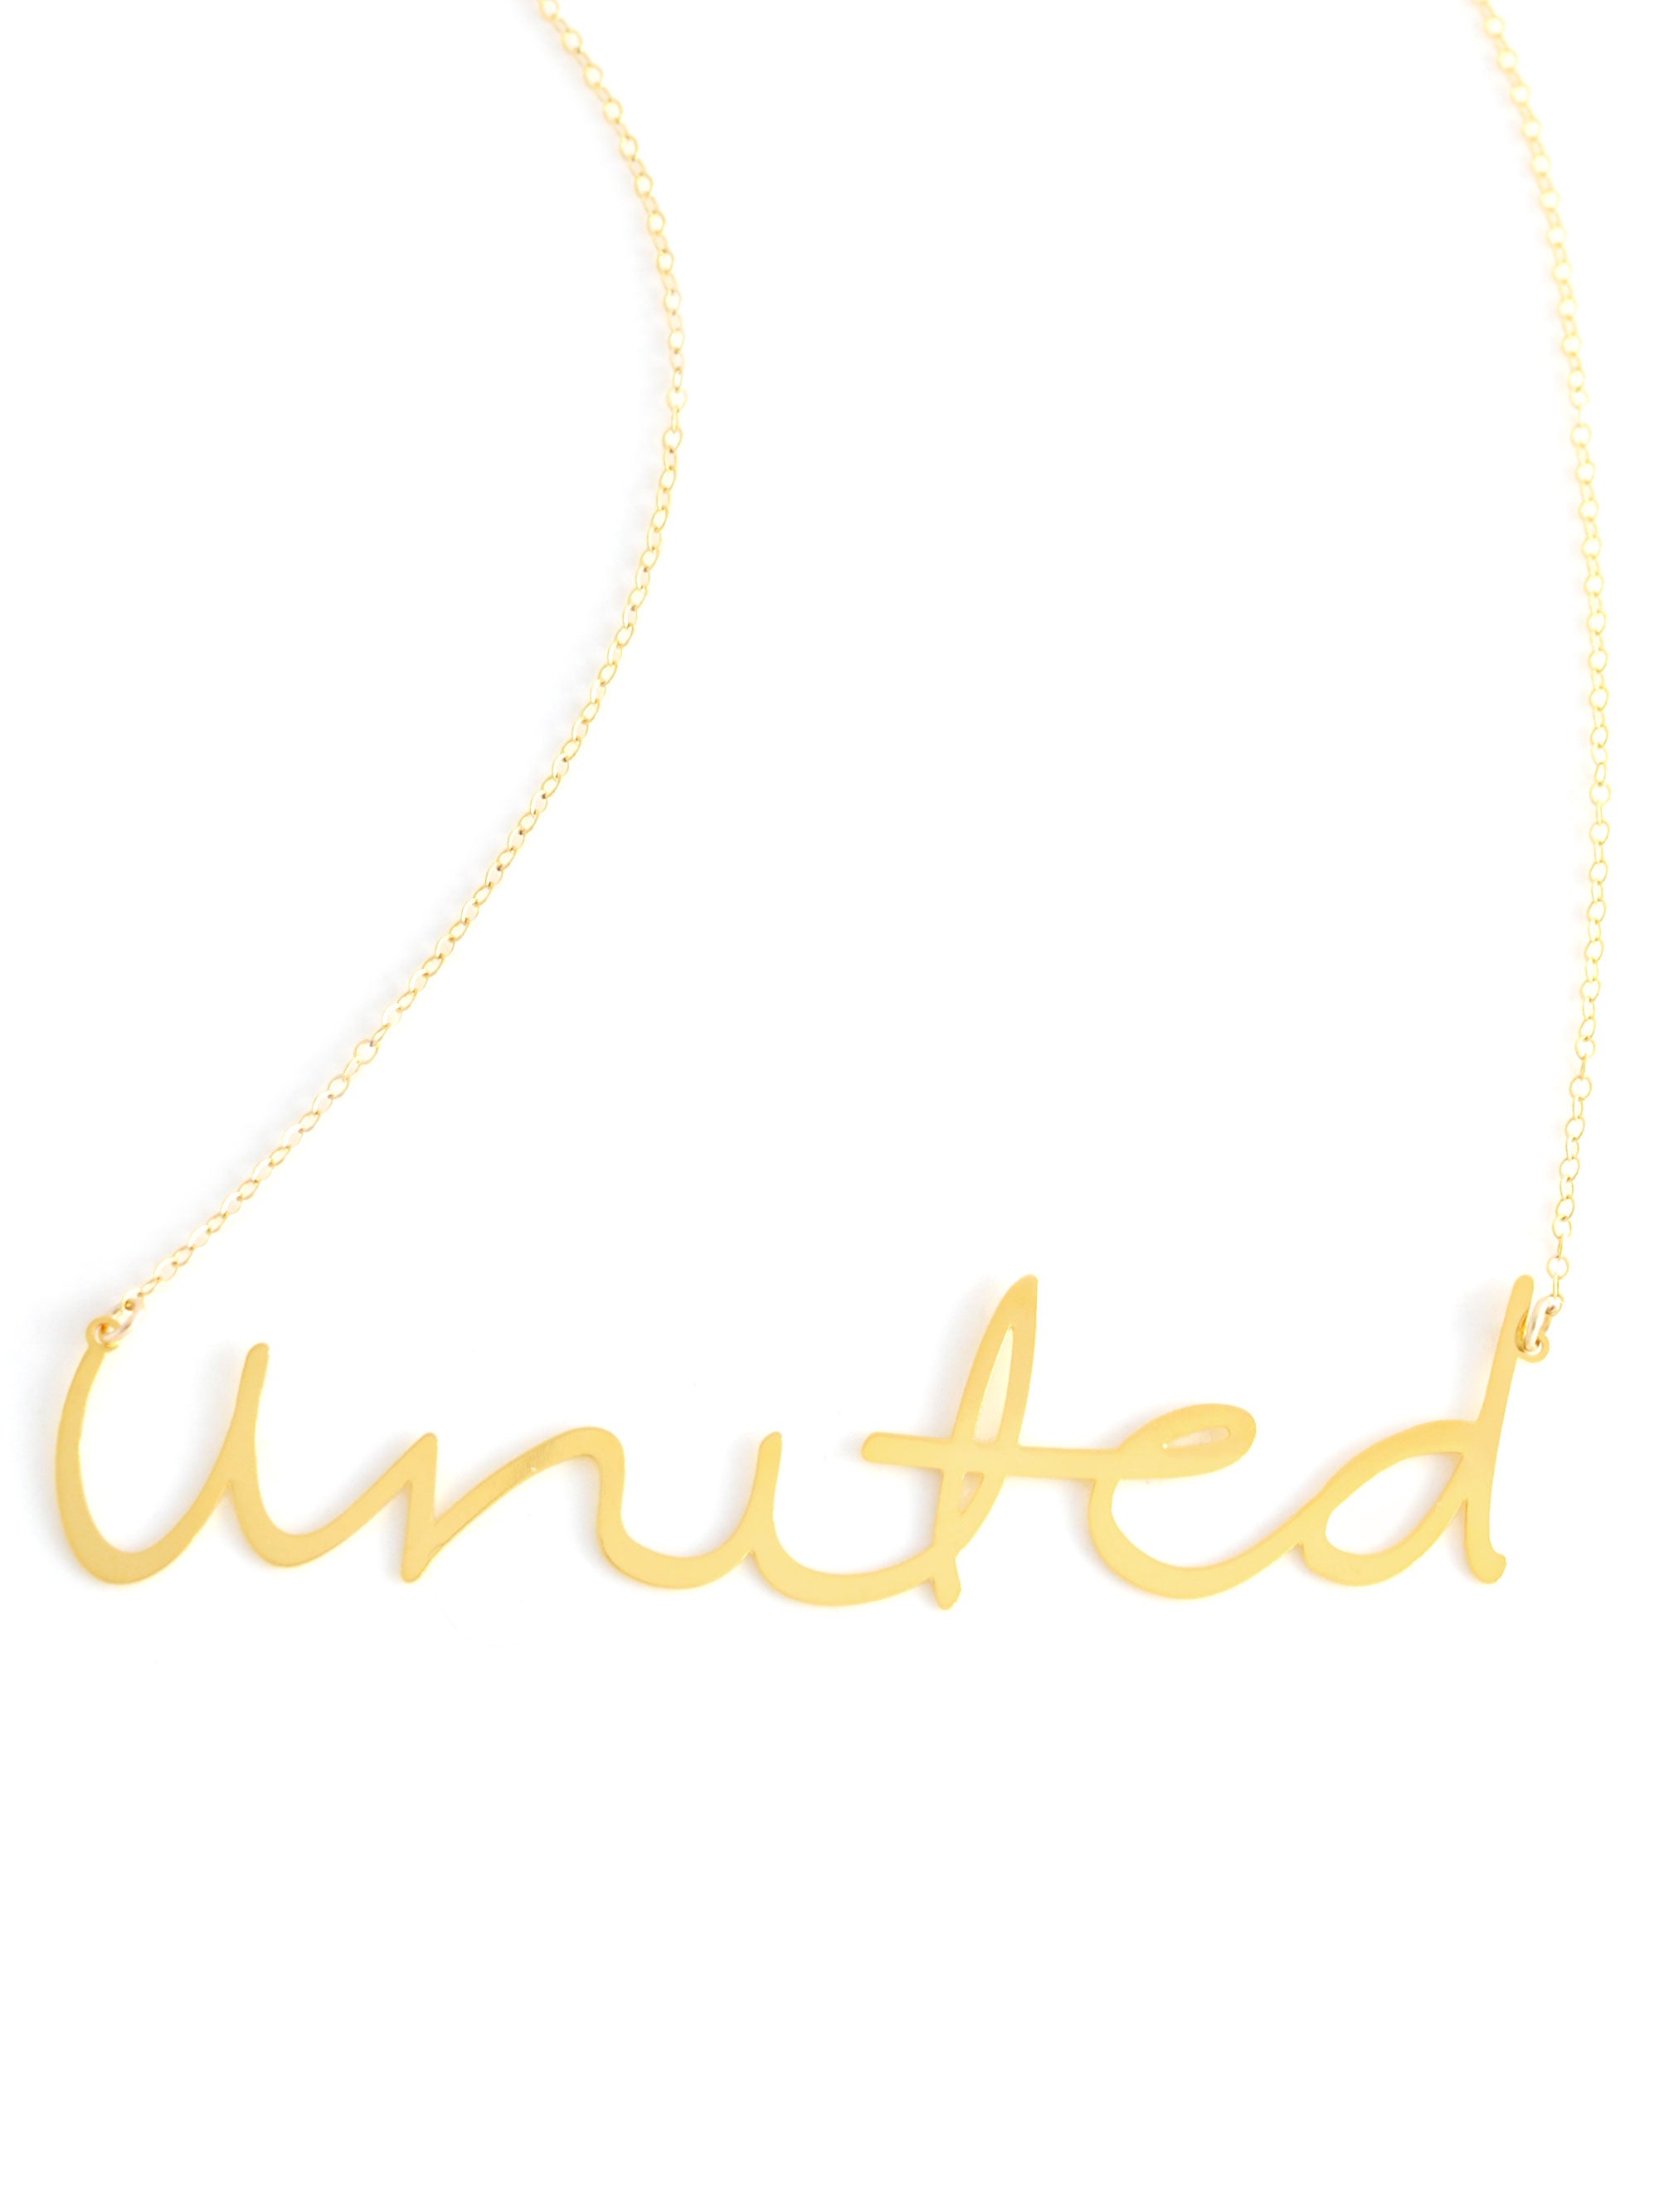 United Necklace - High Quality, Affordable, Hand Written, Self Love, Mantra Word Necklace - Available in Gold and Silver - Small and Large Sizes - Made in USA - Brevity Jewelry